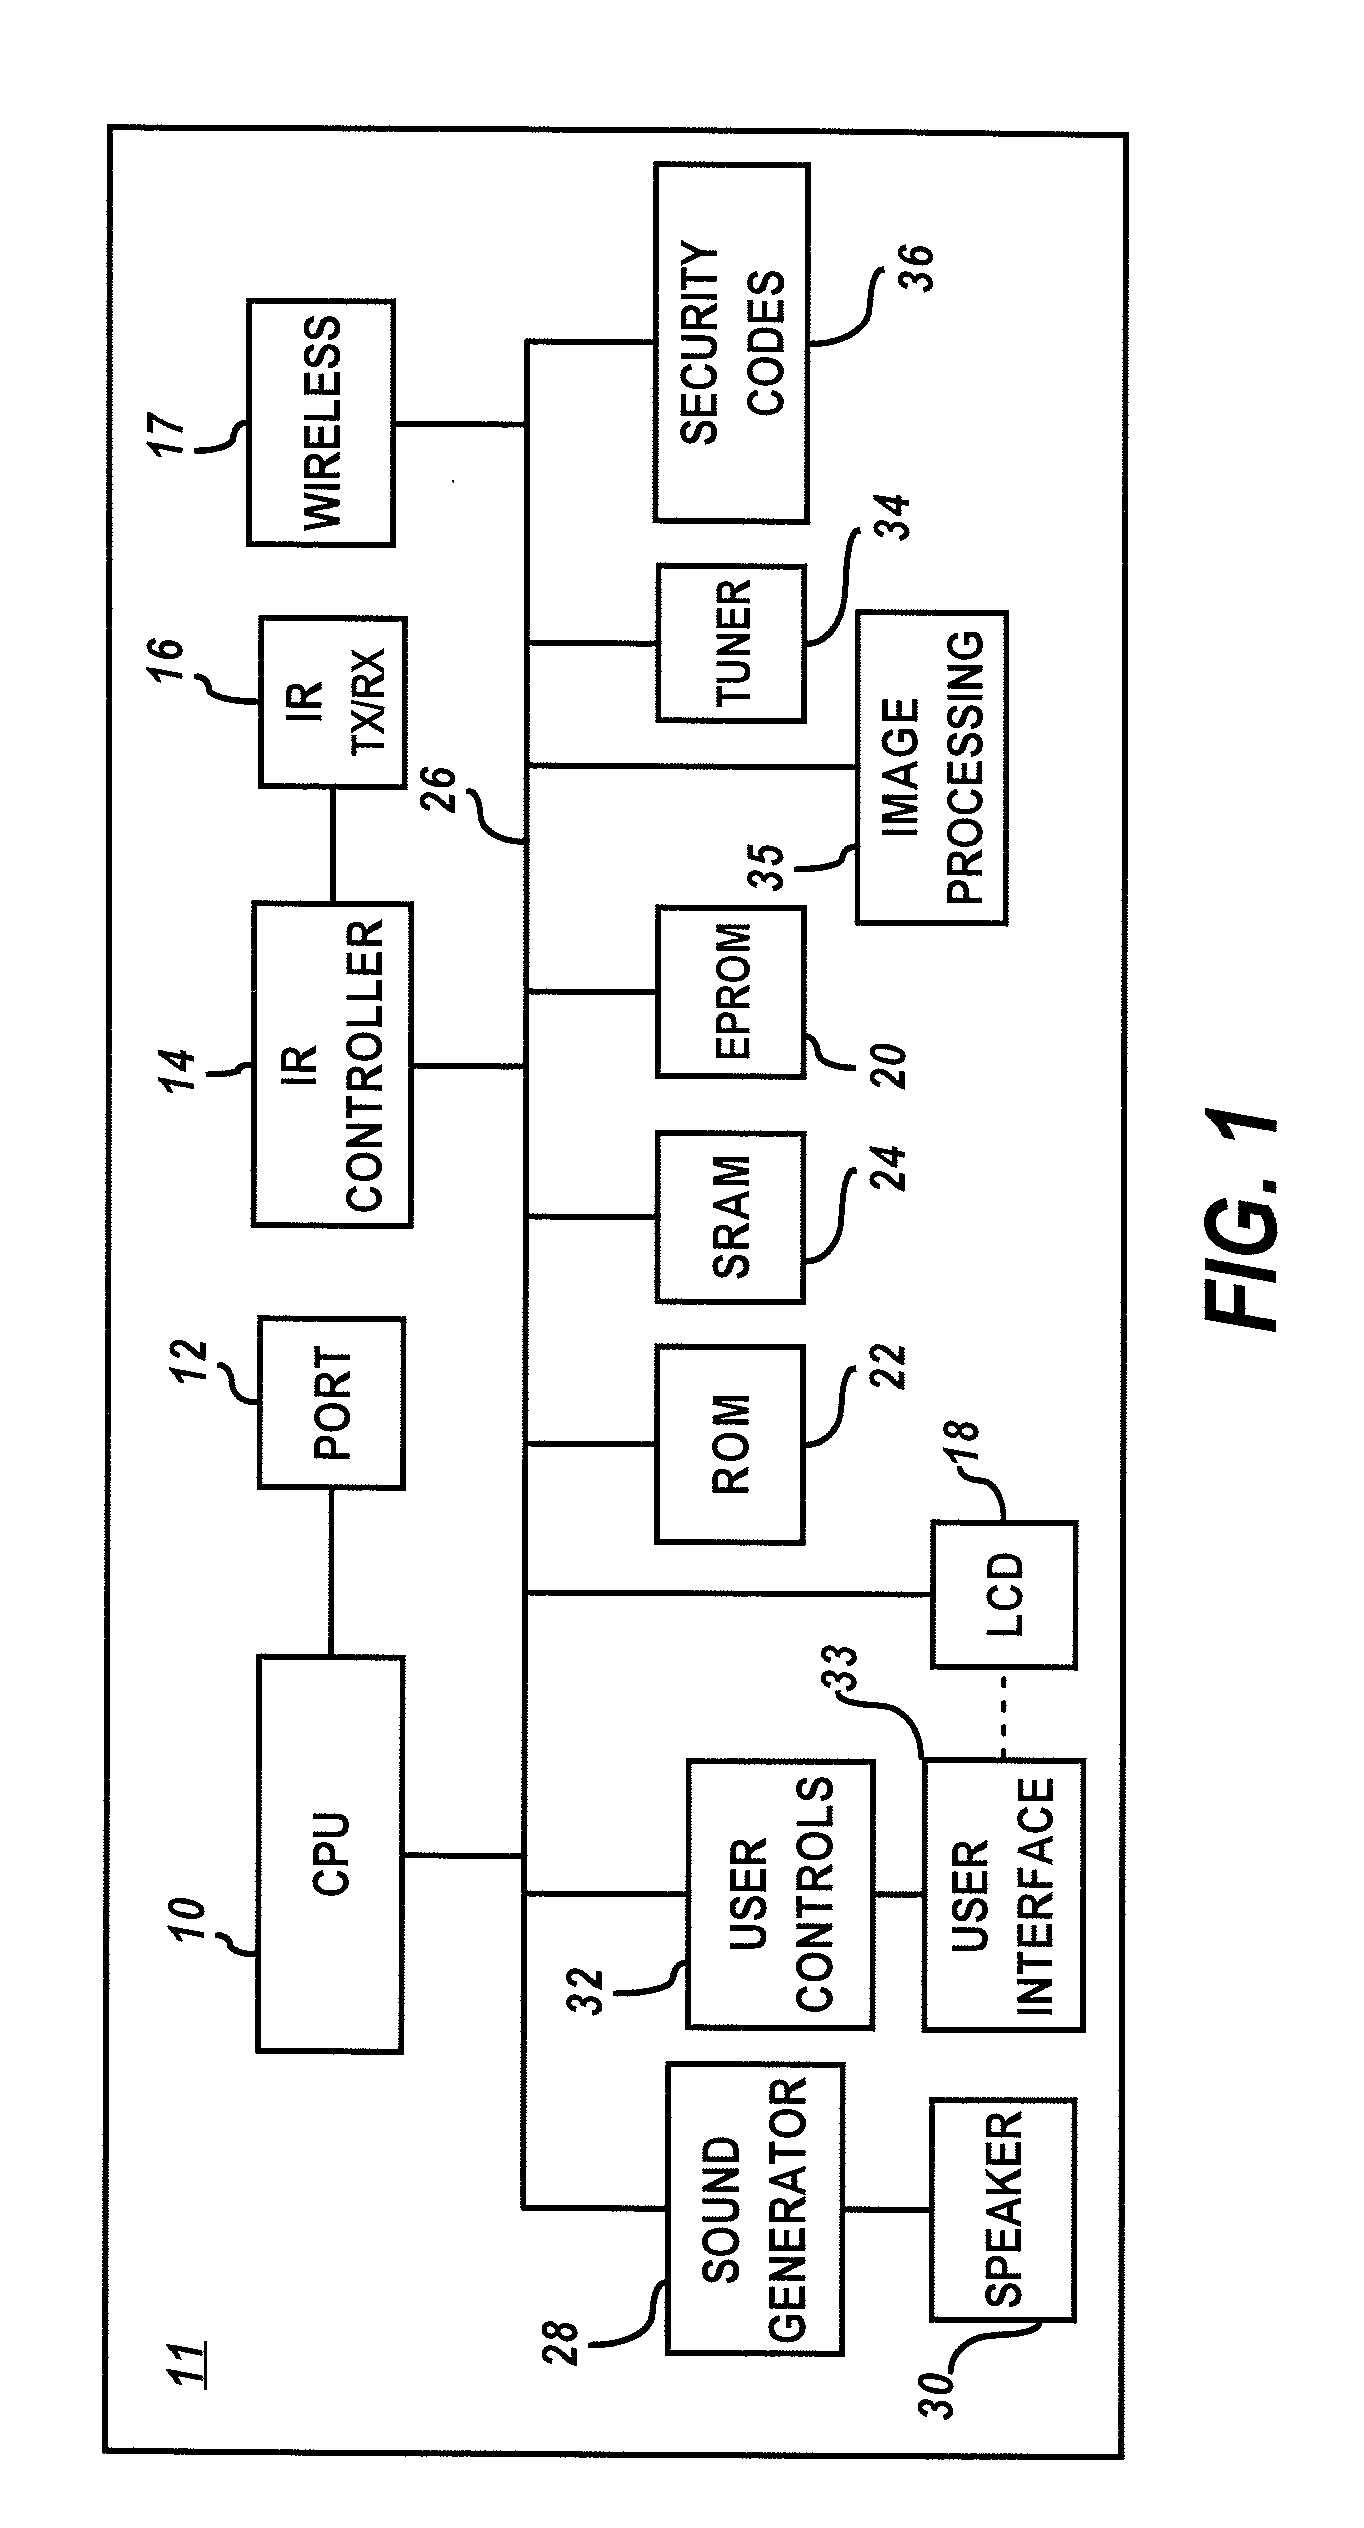 In-play camera associated with headgear used in sporting events and configured to provide wireless transmission of captured video for broadcast to and display at remote video monitors